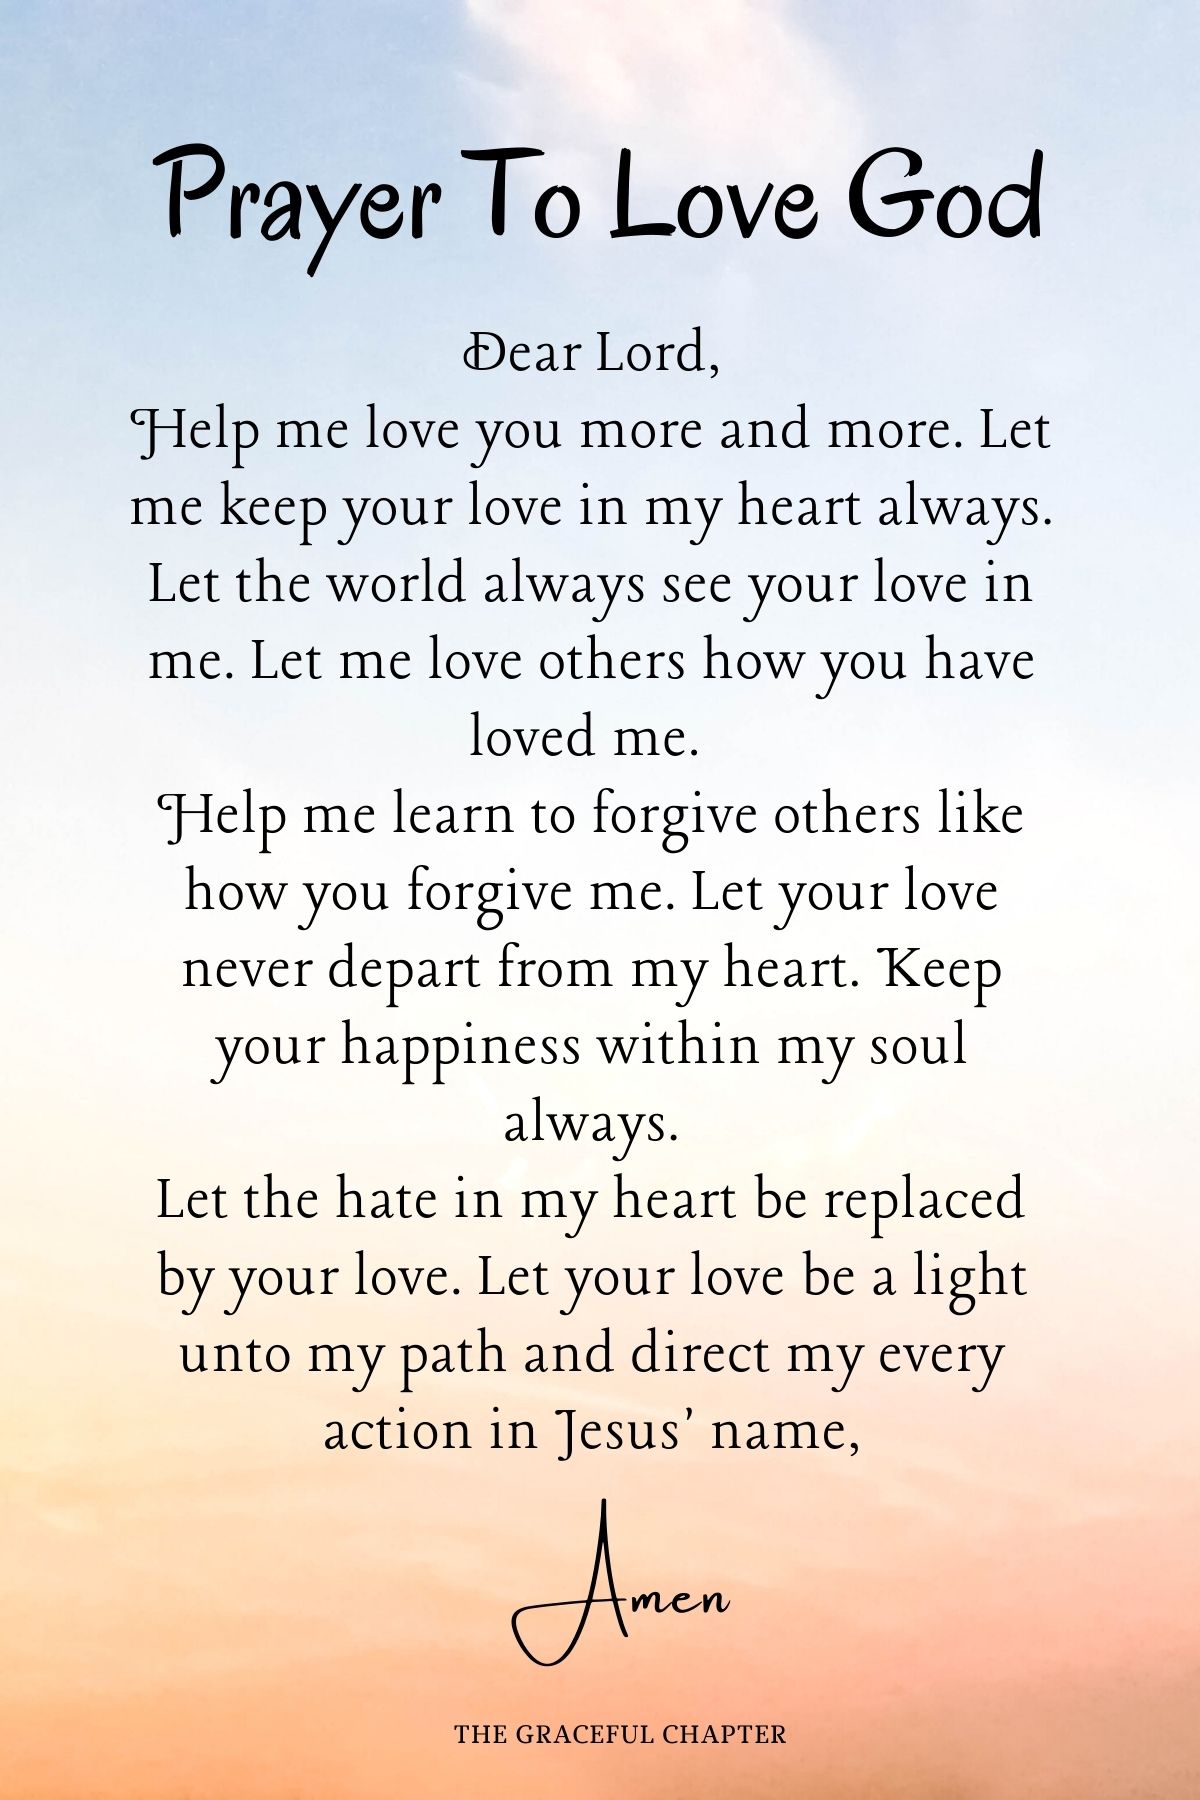 Prayers for your relationship with God - Prayer to love God